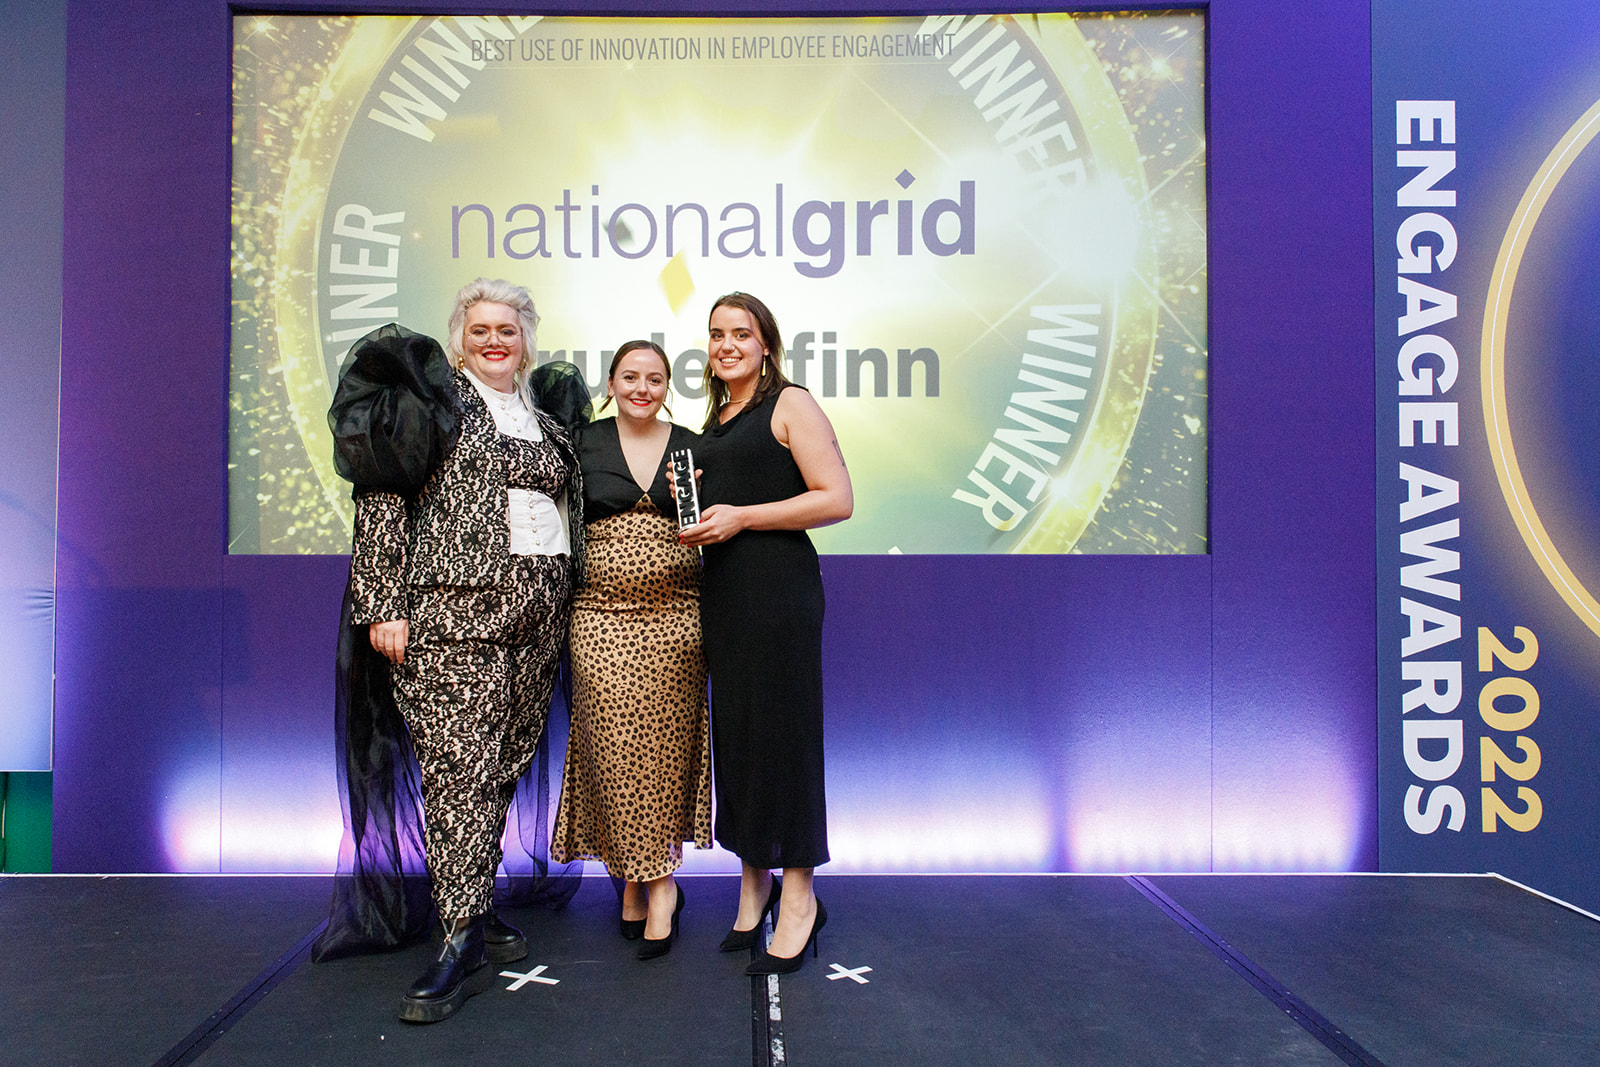 Laura Jameson, National Grid’s Senior Manager of Colleague Communications and Engagement, discussed the work they did to win the award.